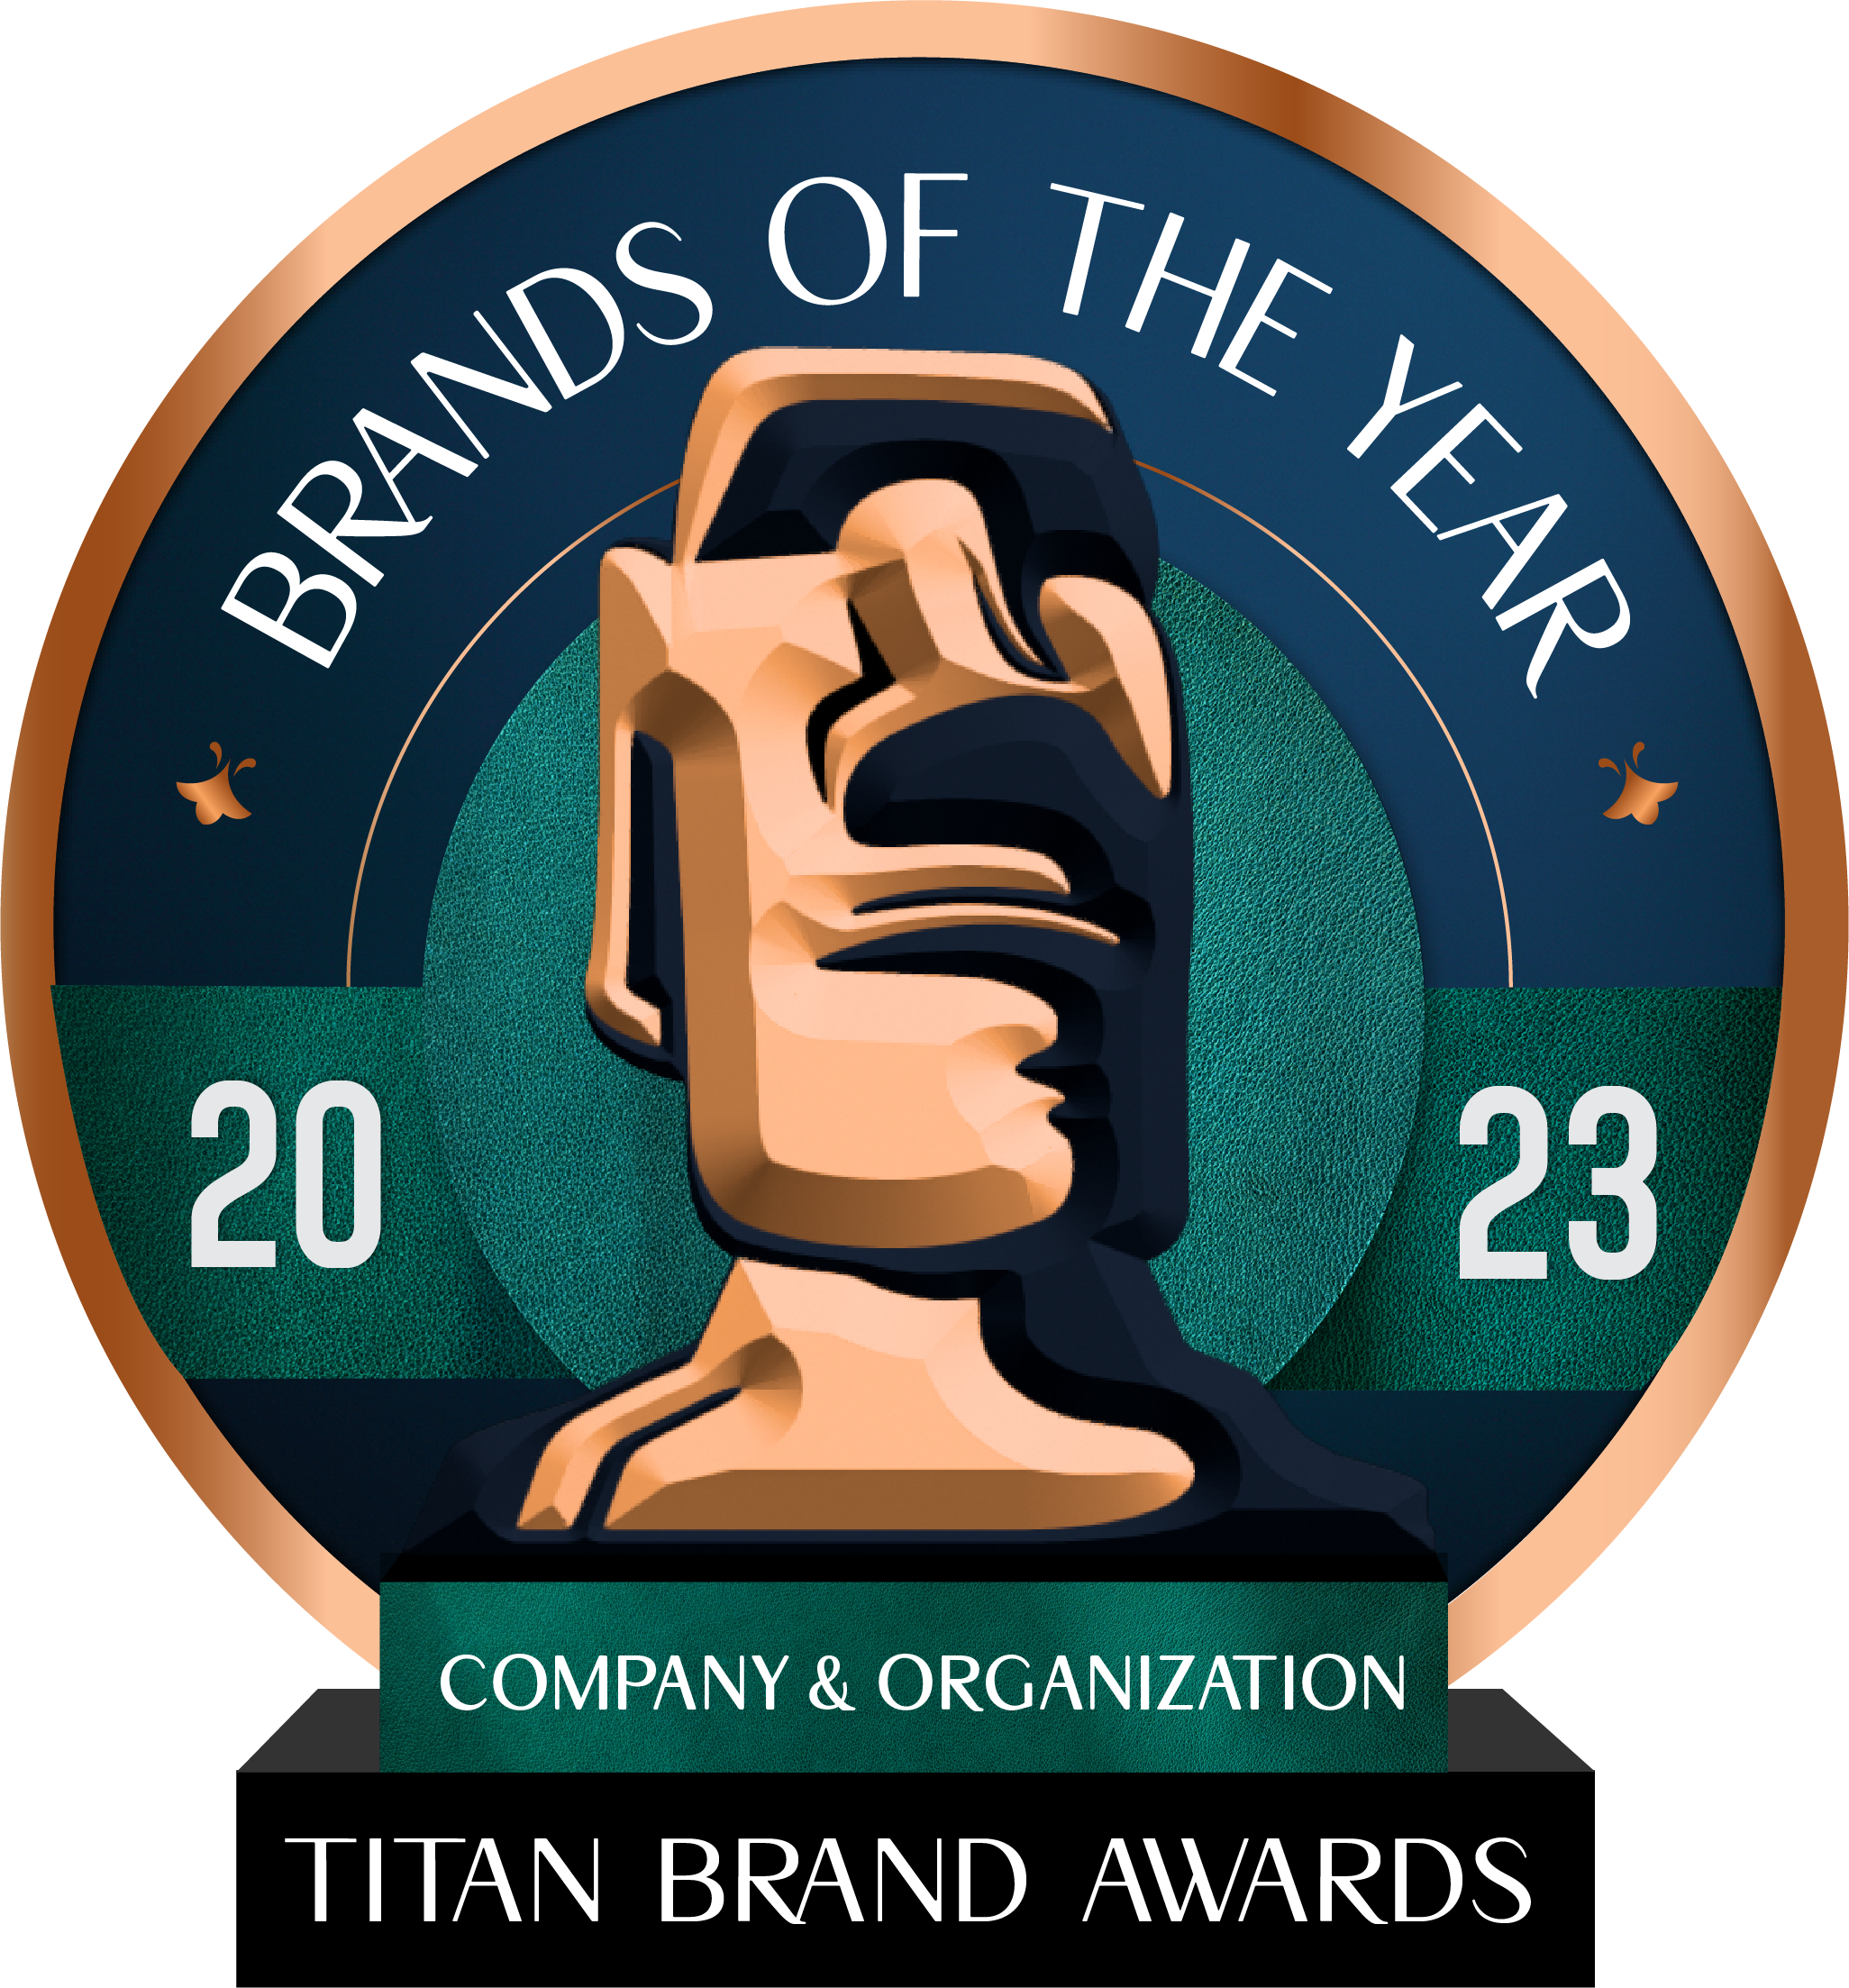 Brand of the Year Awards - Honoring the strong organizations, executives, employees, and teams behind the success of your brands.